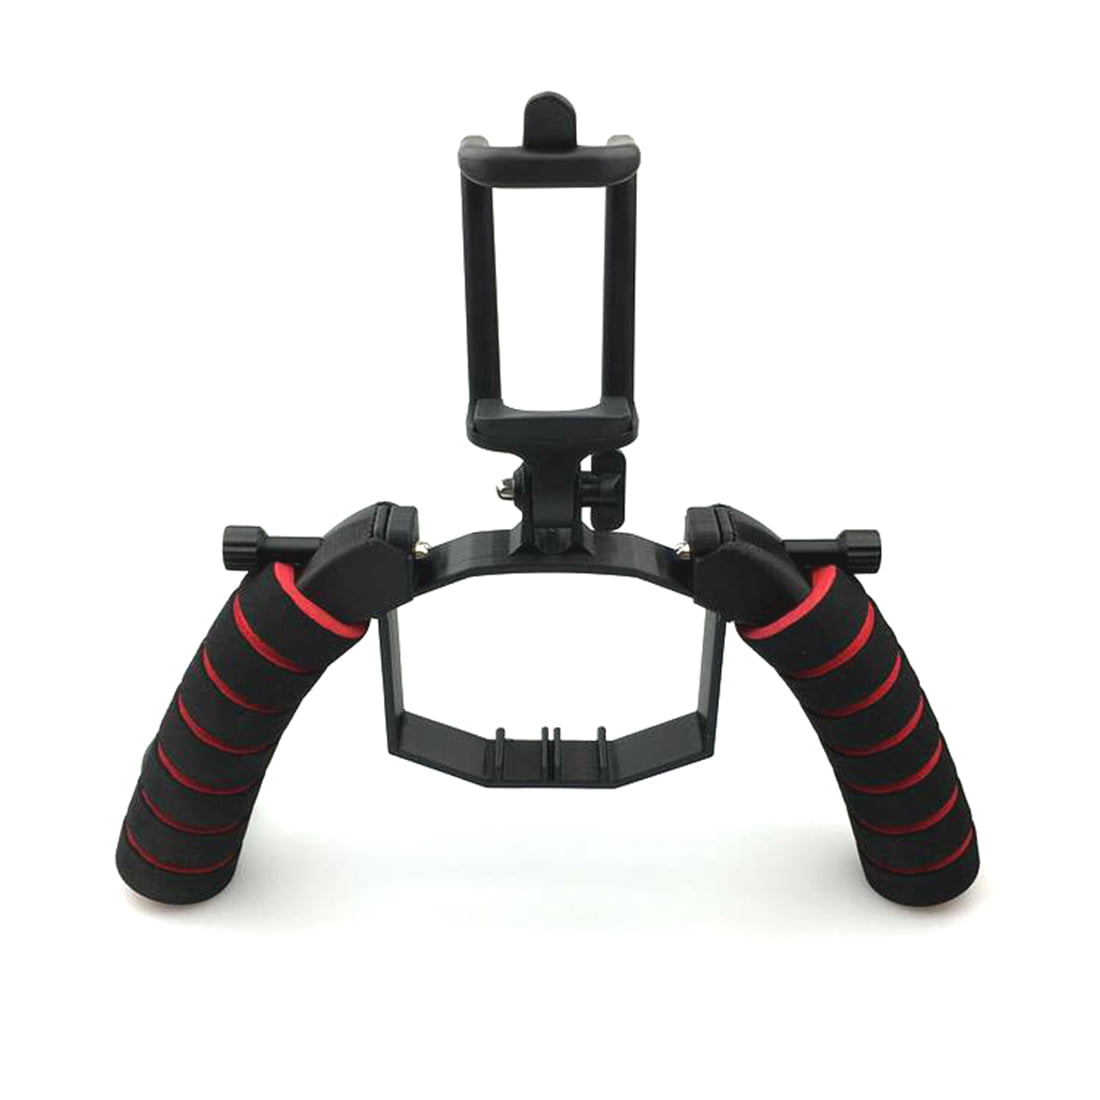 Portable Handle PTZ Stabilizer Carrier Support Bracket Kit Gimbal Modification Kits Drone Parts PINCHUANGHUI 3D Printed Mavic Pro Accessories